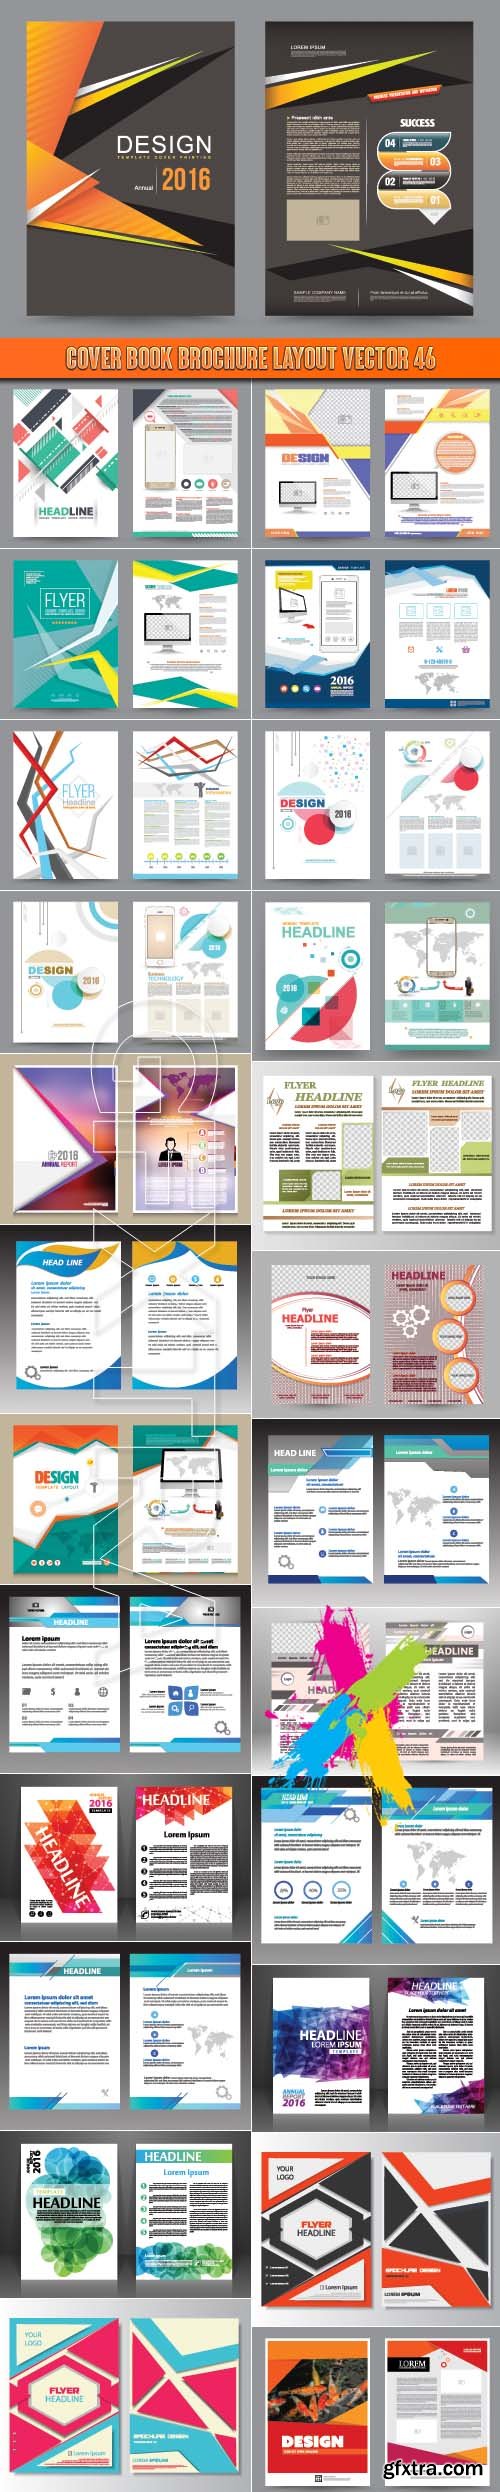 Cover book brochure layout vector 46